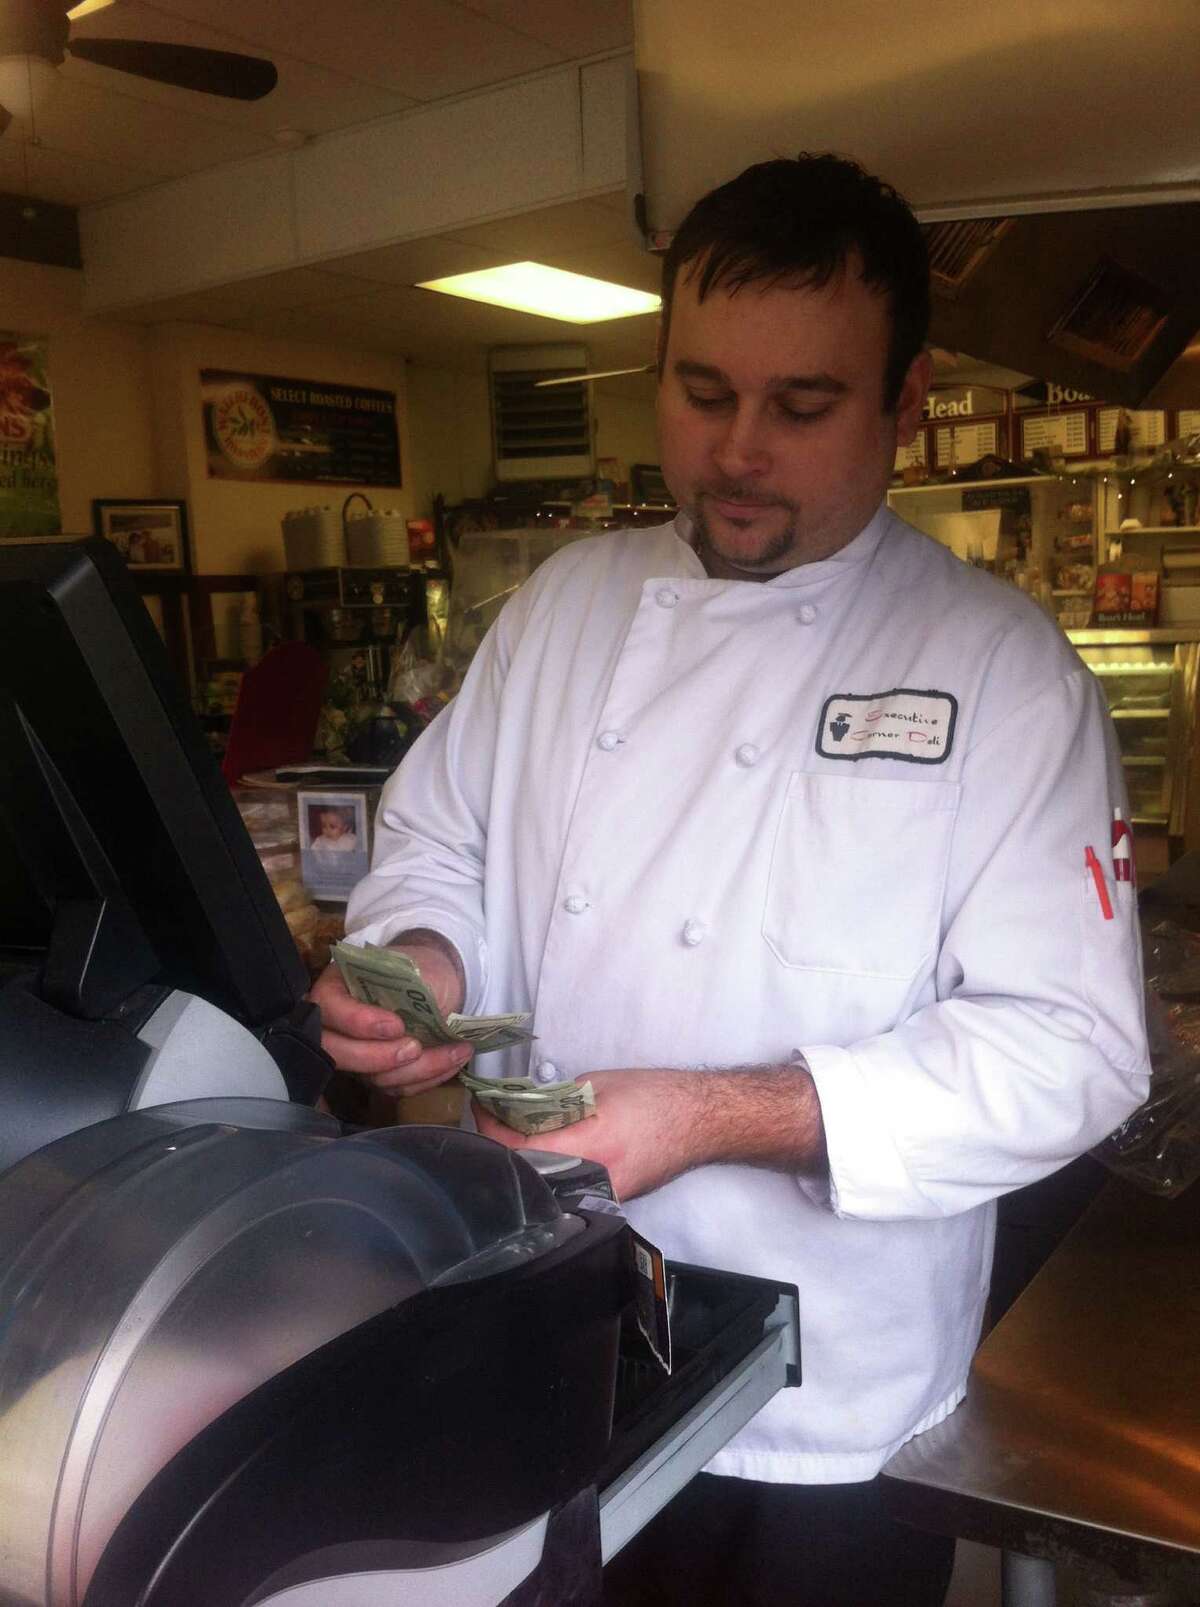 Kevin Allmashy, owner and executive chef of Executive Corner Deli & Catering, behind the register at the Byram store Saturday, Feb. 16, 2013. A man passed a counterfeit $100 bill to a store employee the afternoon of Feb. 13, Allmashy said.